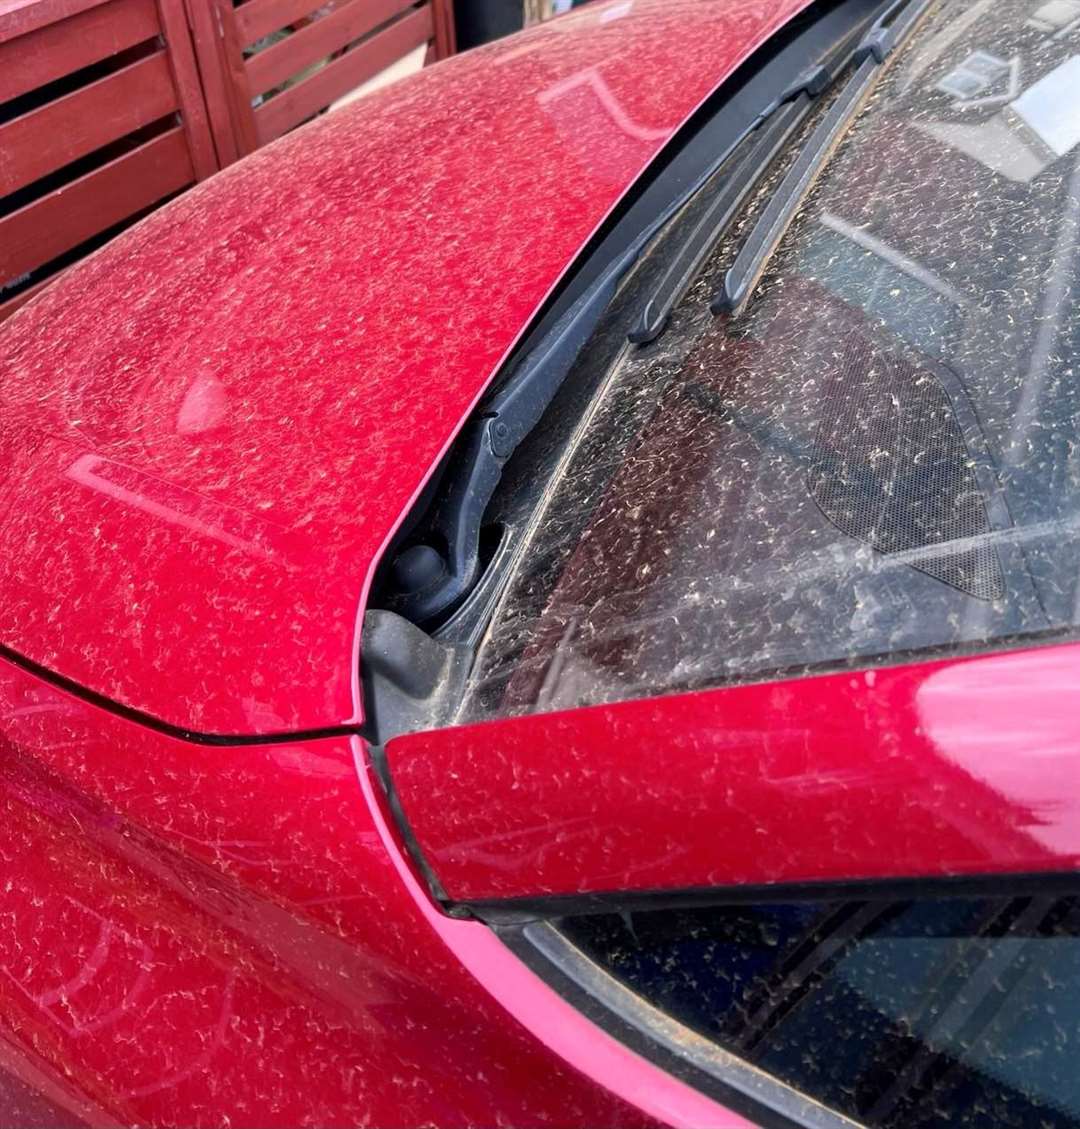 Caroline Shepherd says her car is often left with an “orangey yellow sheen” due to the dust from the construction site. Picture: Caroline Shepherd